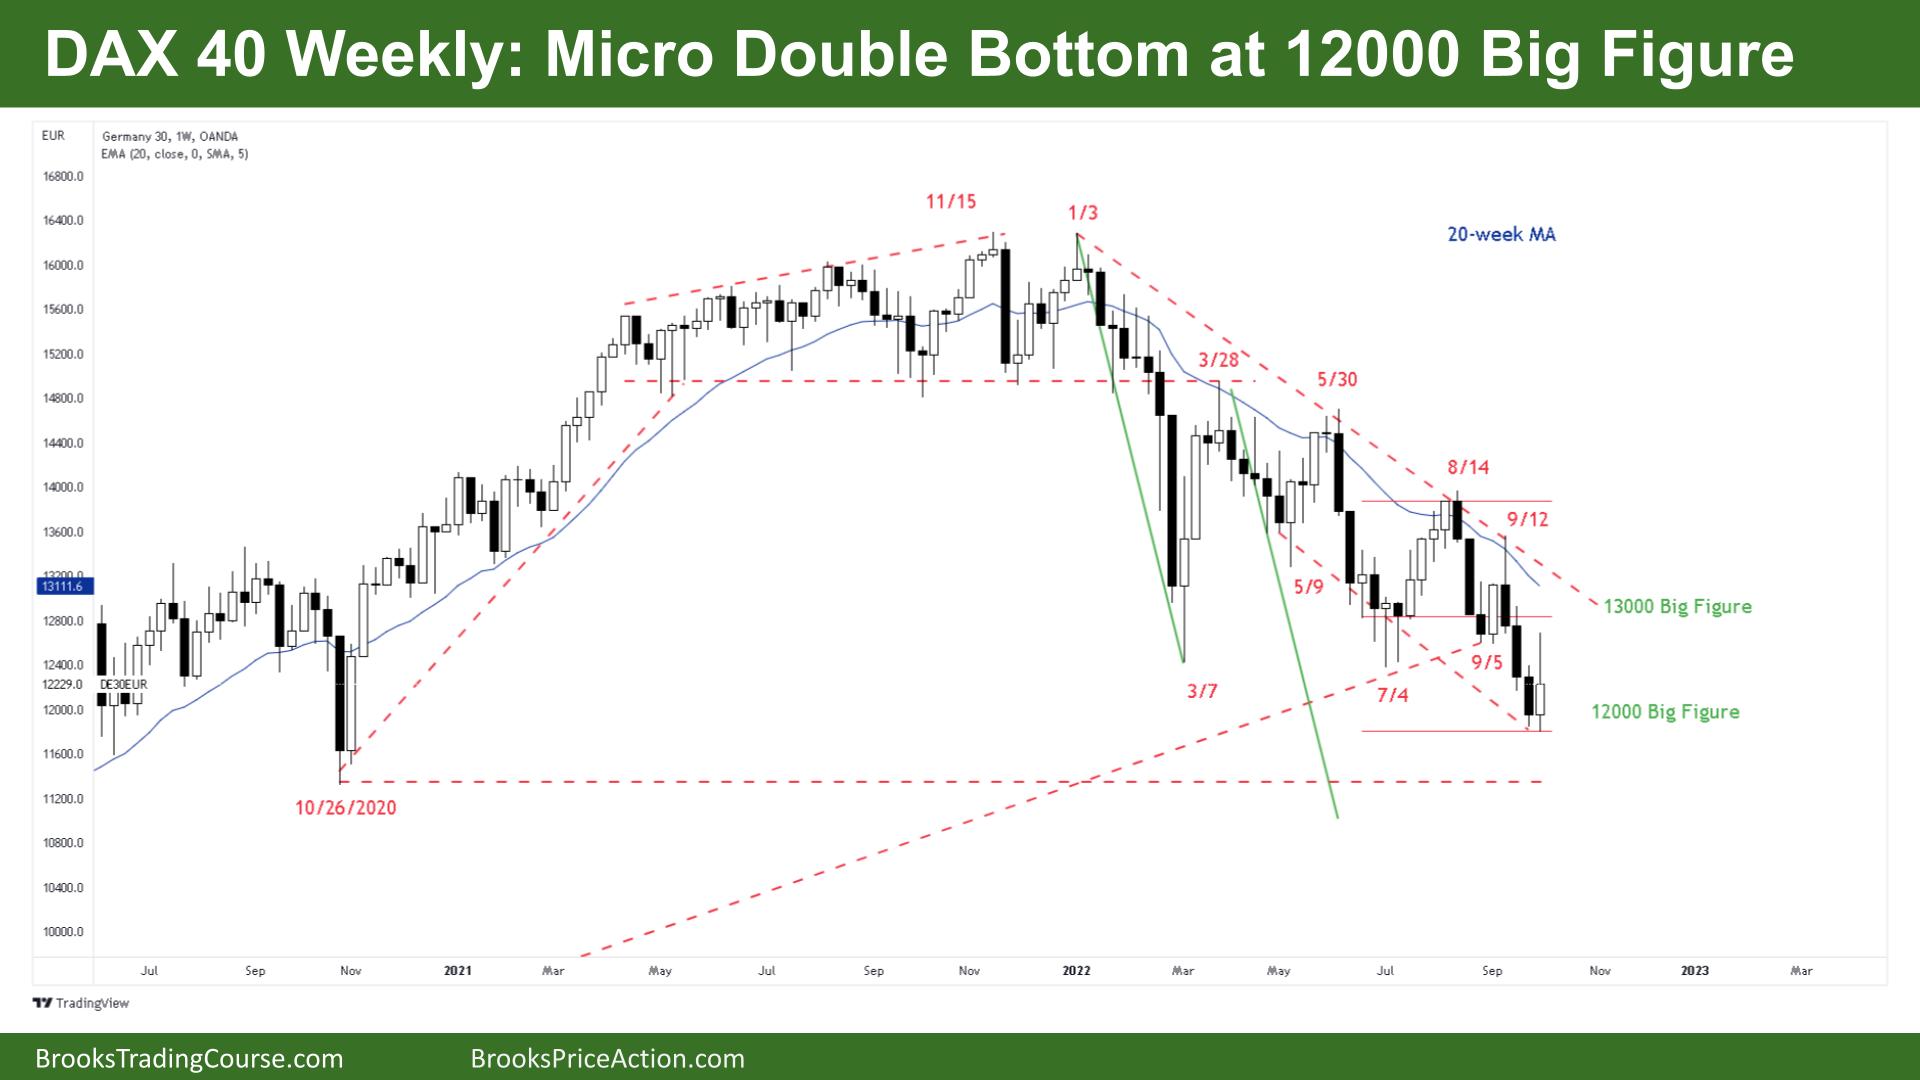 DAX 40 Micro Double Bottom at 12000 Big Figure on Weekly Chart